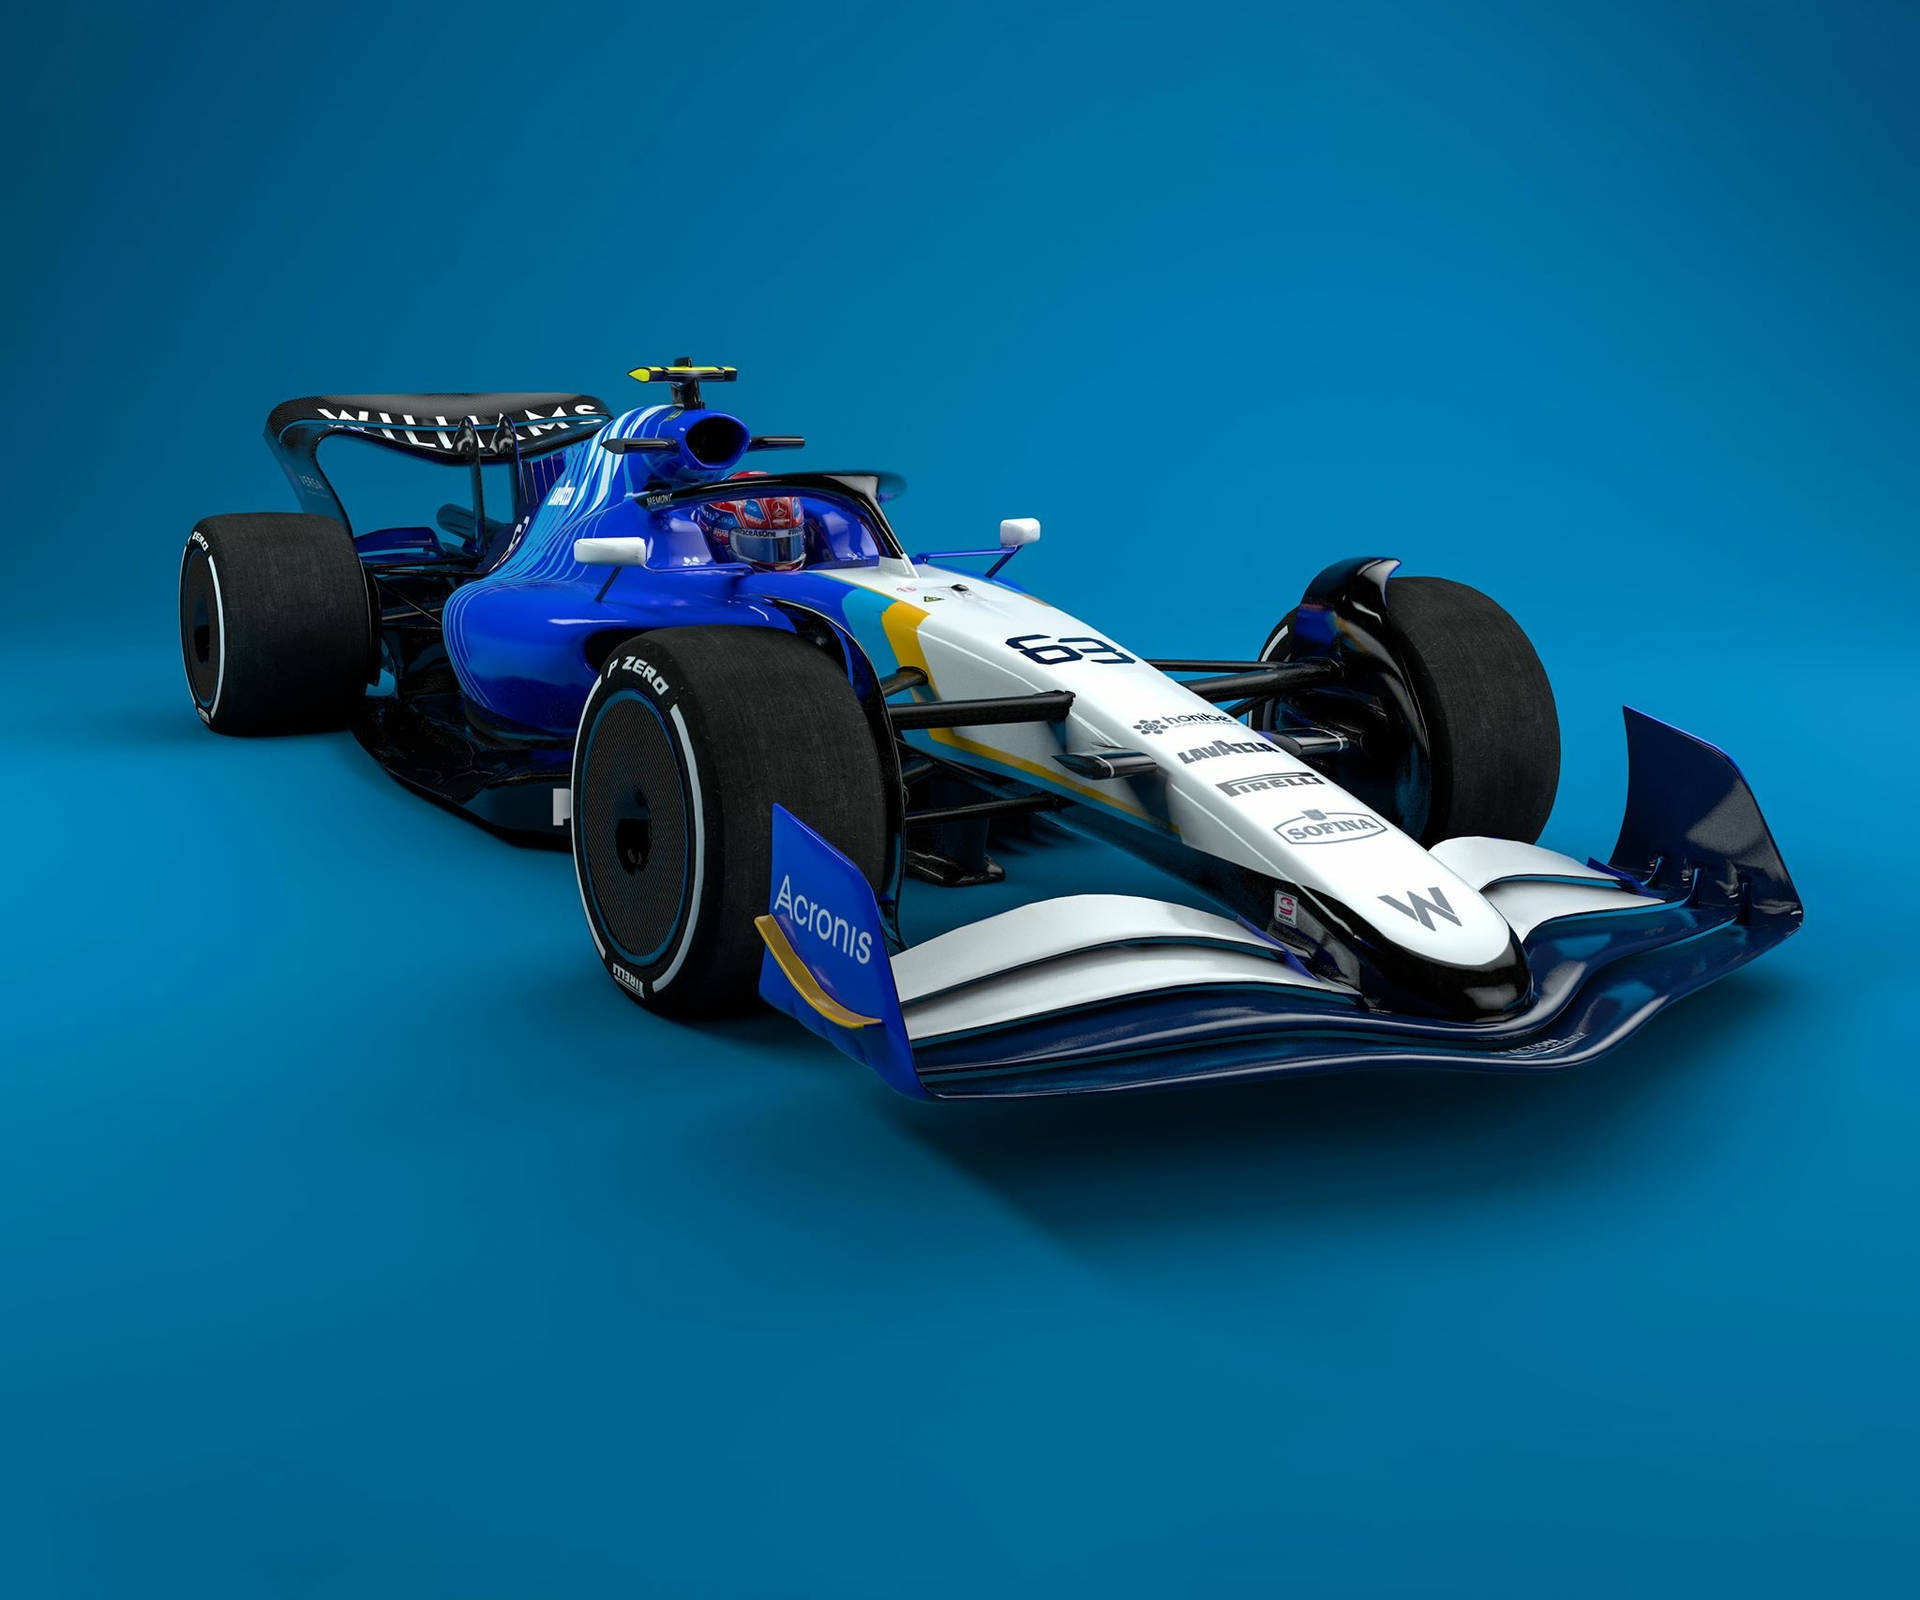 Blue And White Williams Car Wallpaper